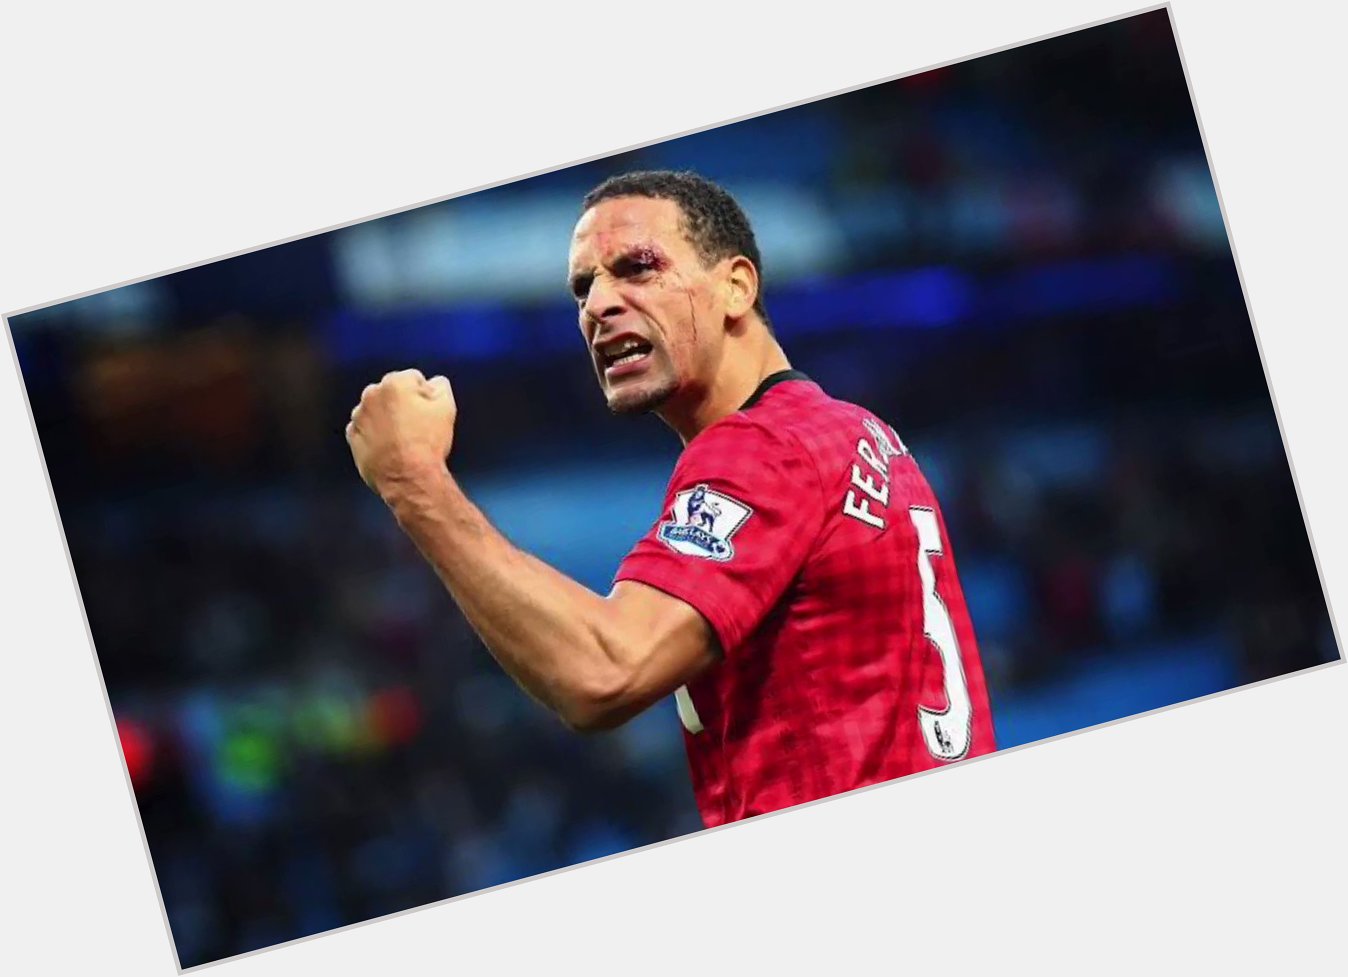 Wishing a very Happy 42nd Birthday to an absolute beast and legend Rio Ferdinand.   